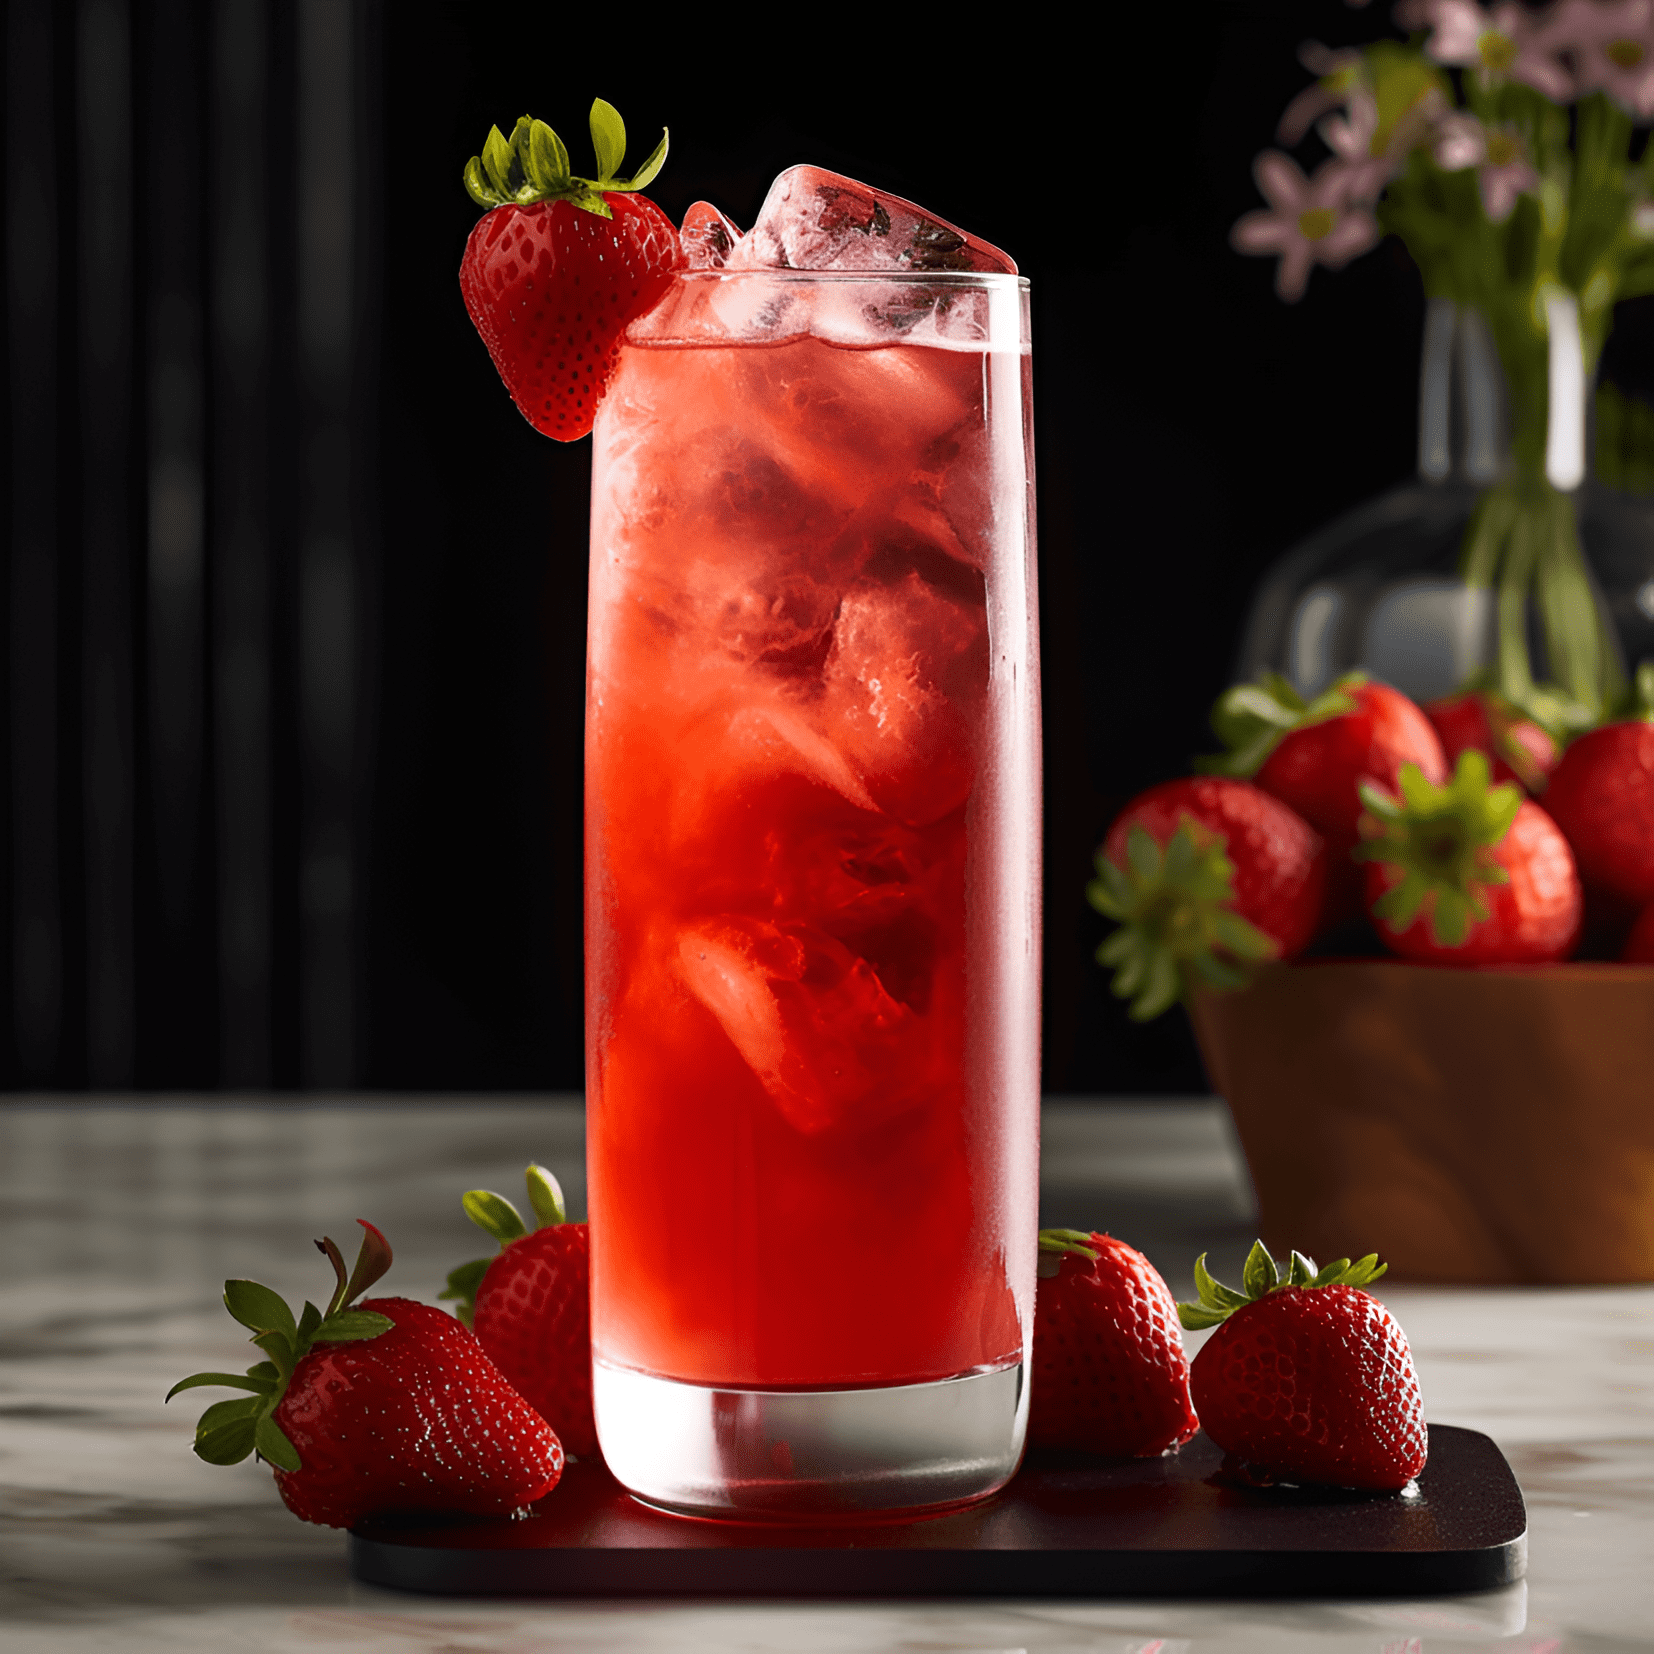 Strawberry Fields Cocktail Recipe - The Strawberry Fields cocktail has a sweet and slightly tart taste, with the fresh strawberries providing a burst of fruity flavor. The drink is light and refreshing, with a hint of citrus from the lemon juice and a subtle sweetness from the simple syrup.